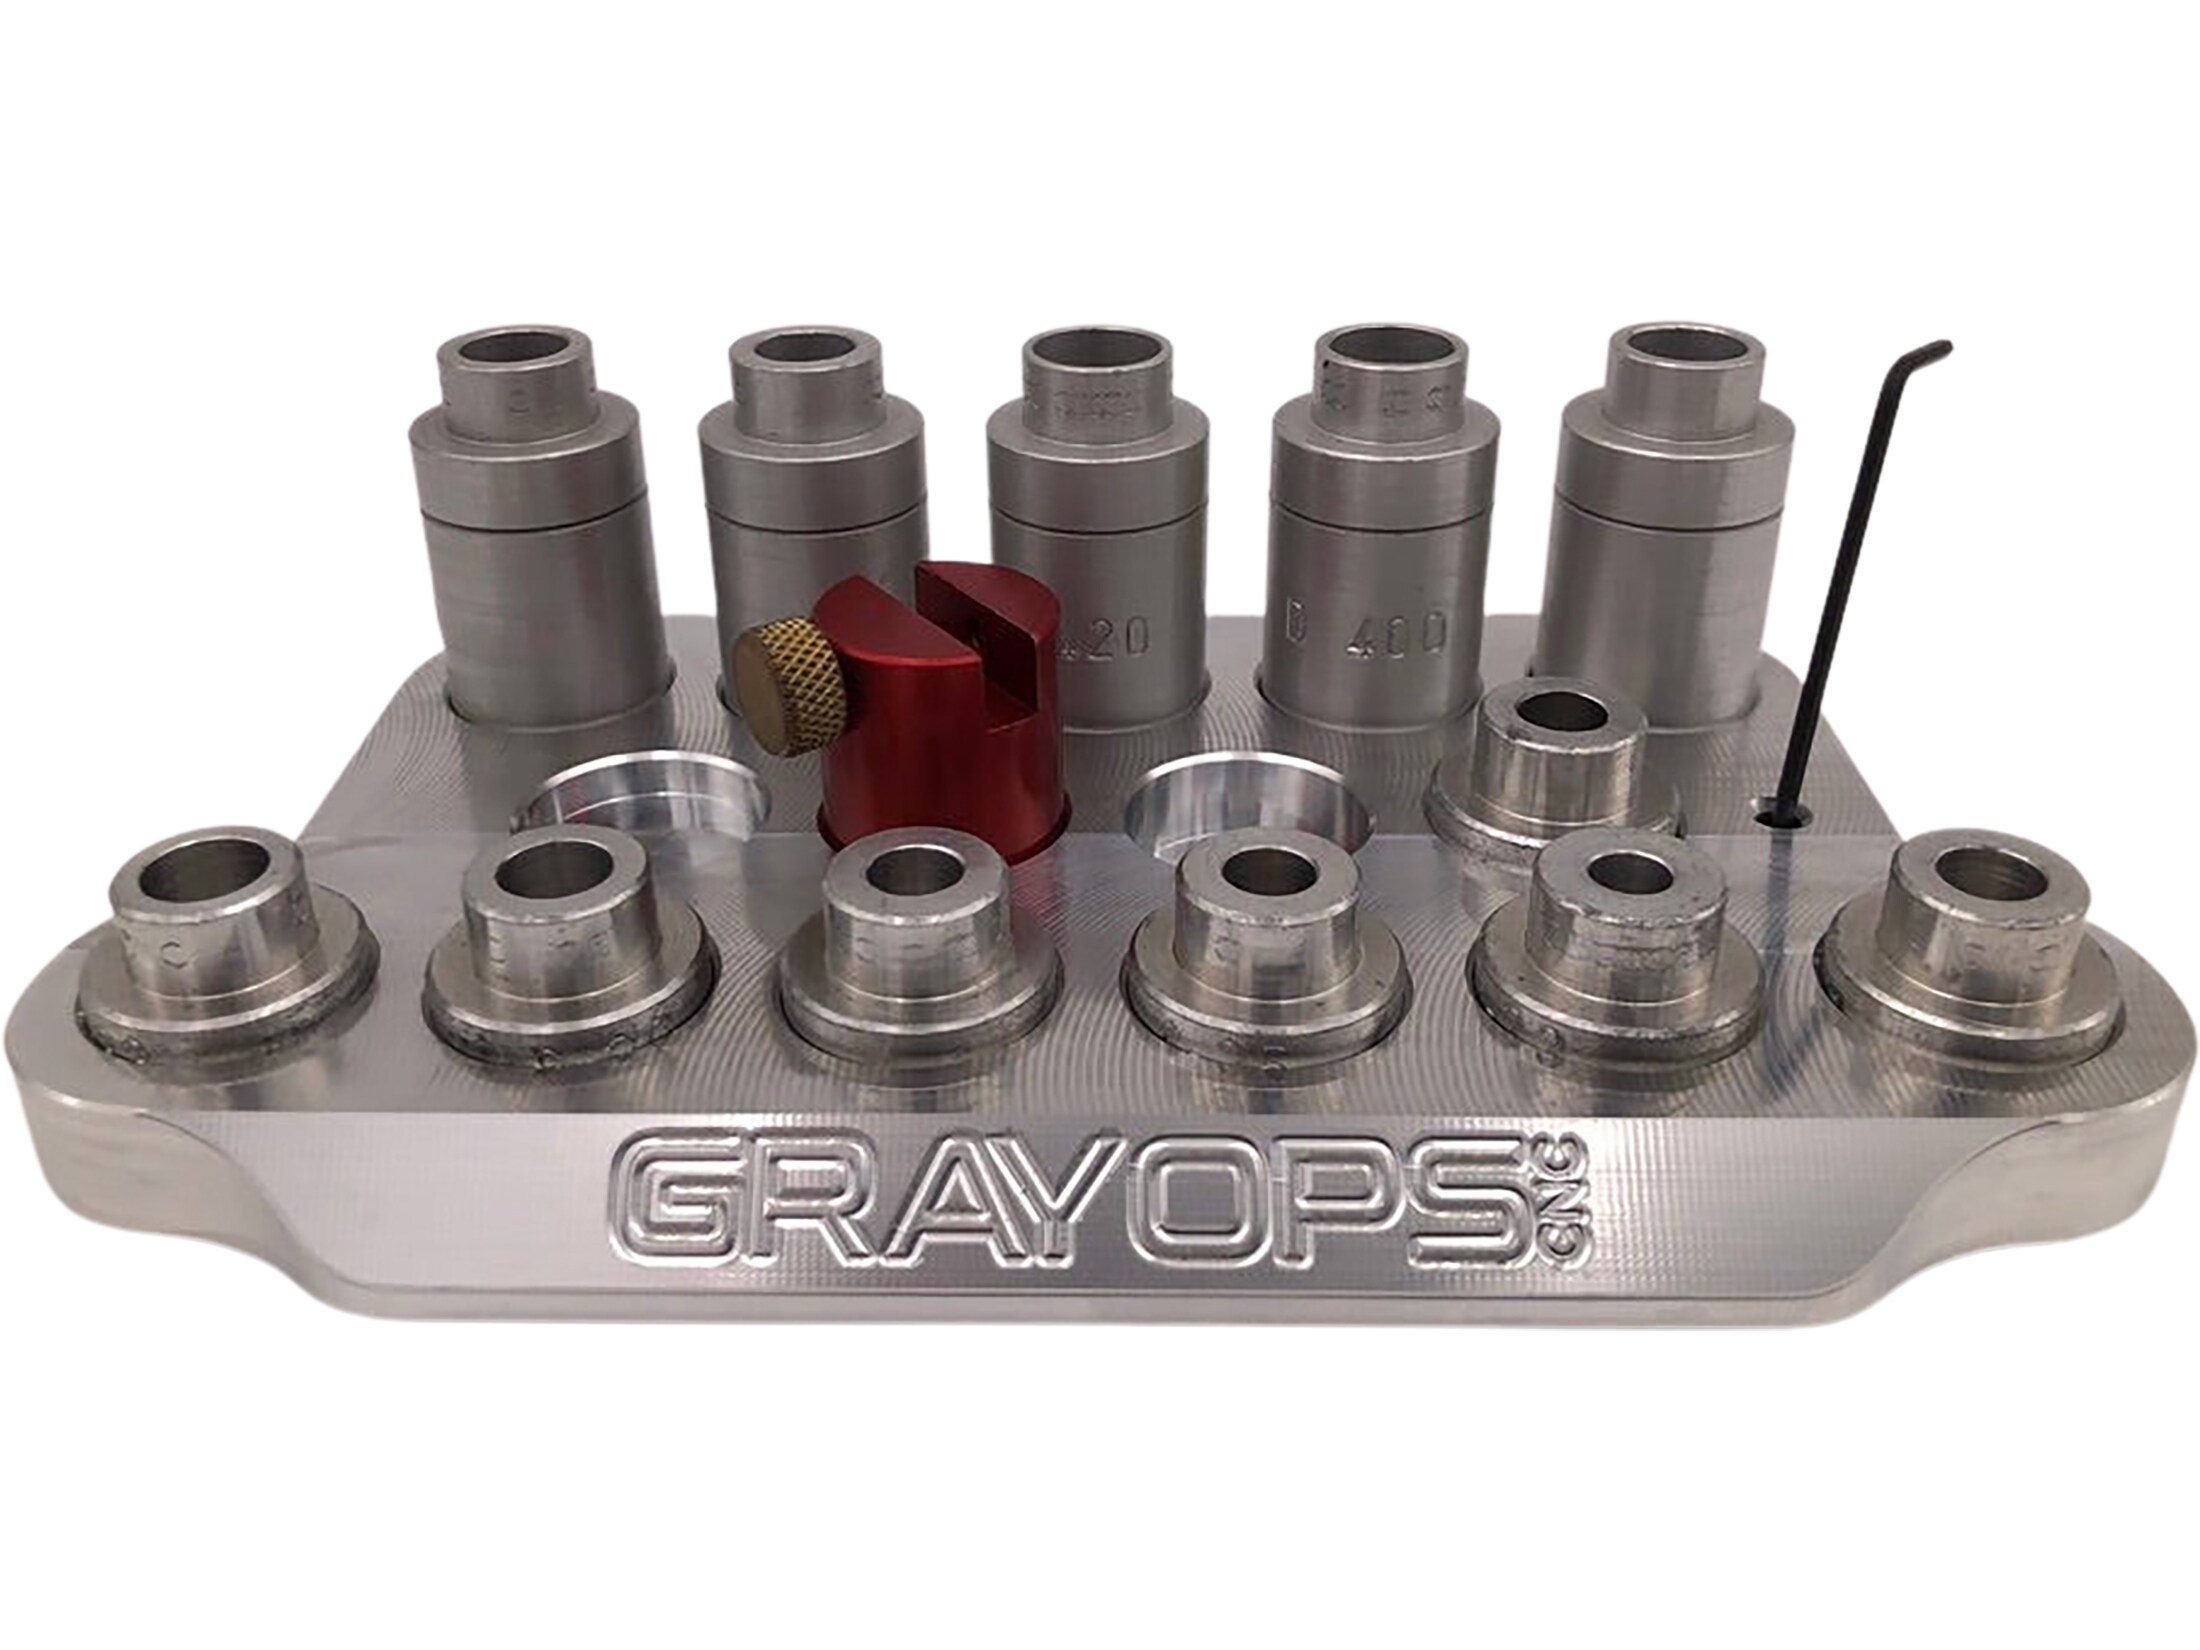 Gray Ops CNC Reloading Hornady OAL and Comparator Block For Sale